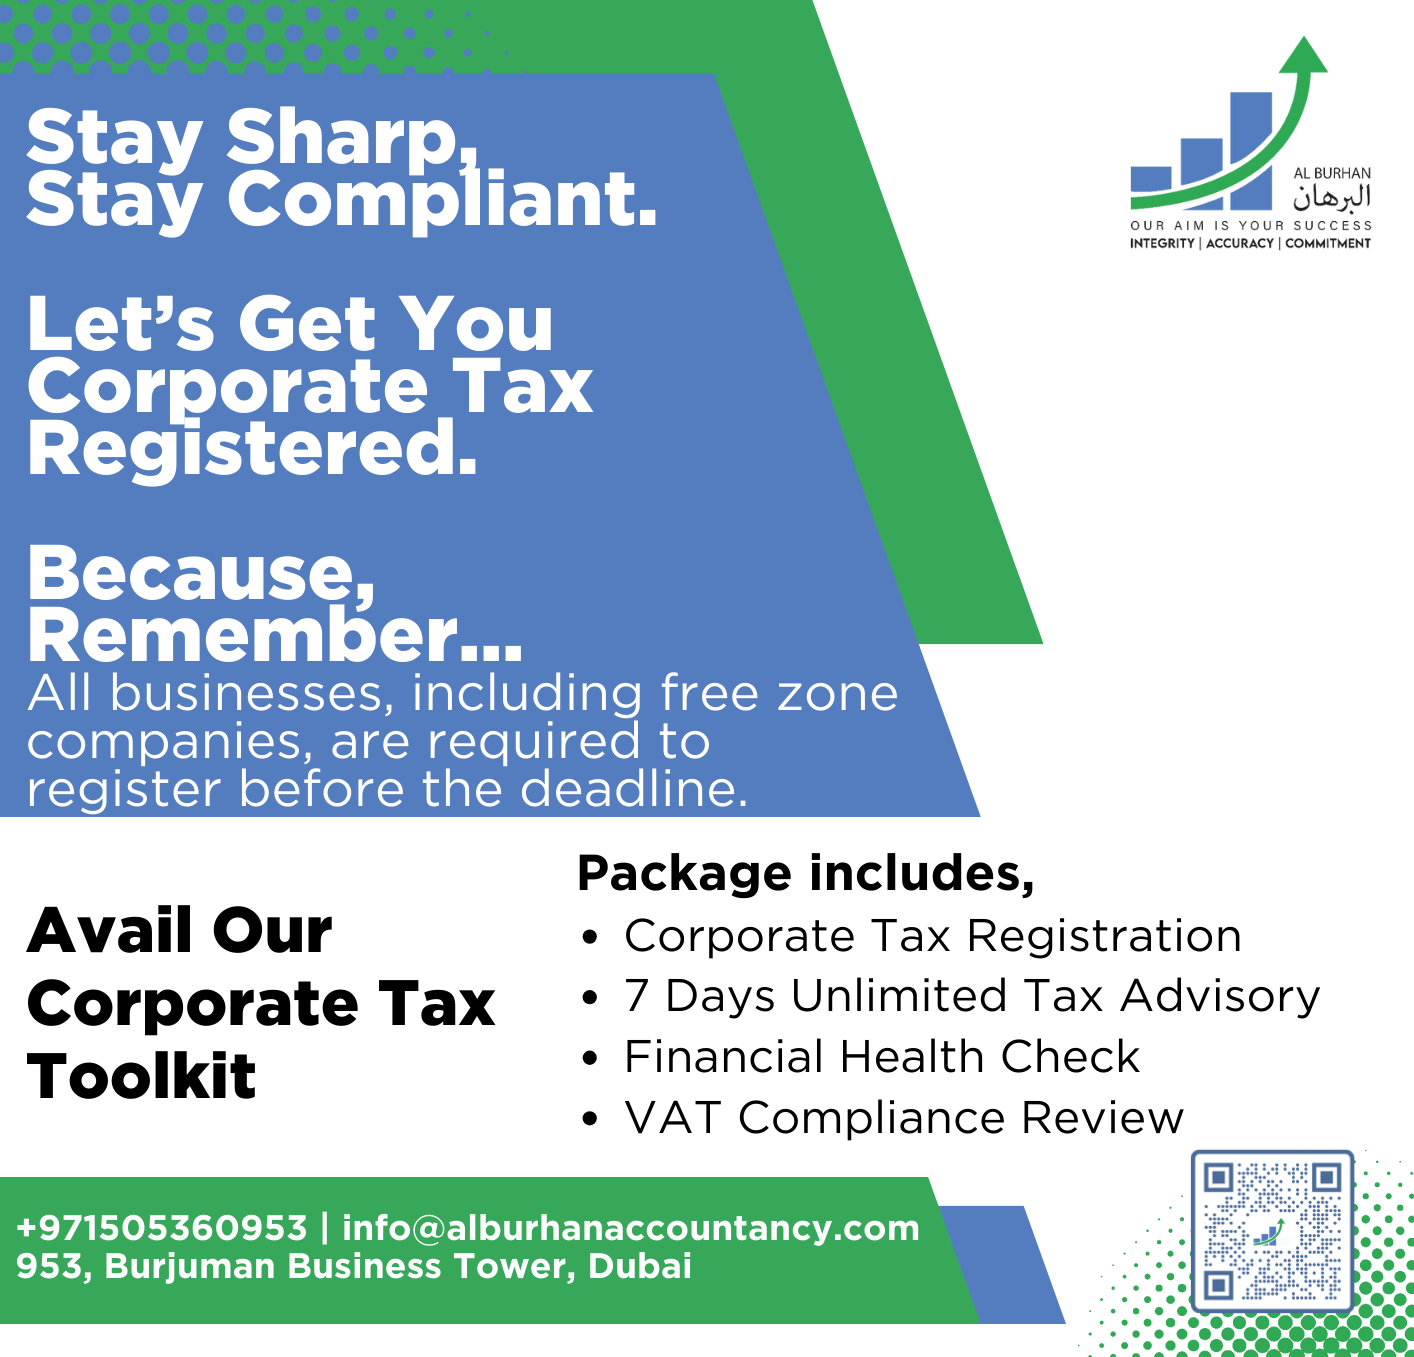 Corporate tax consultancy and registration services for UAE companies